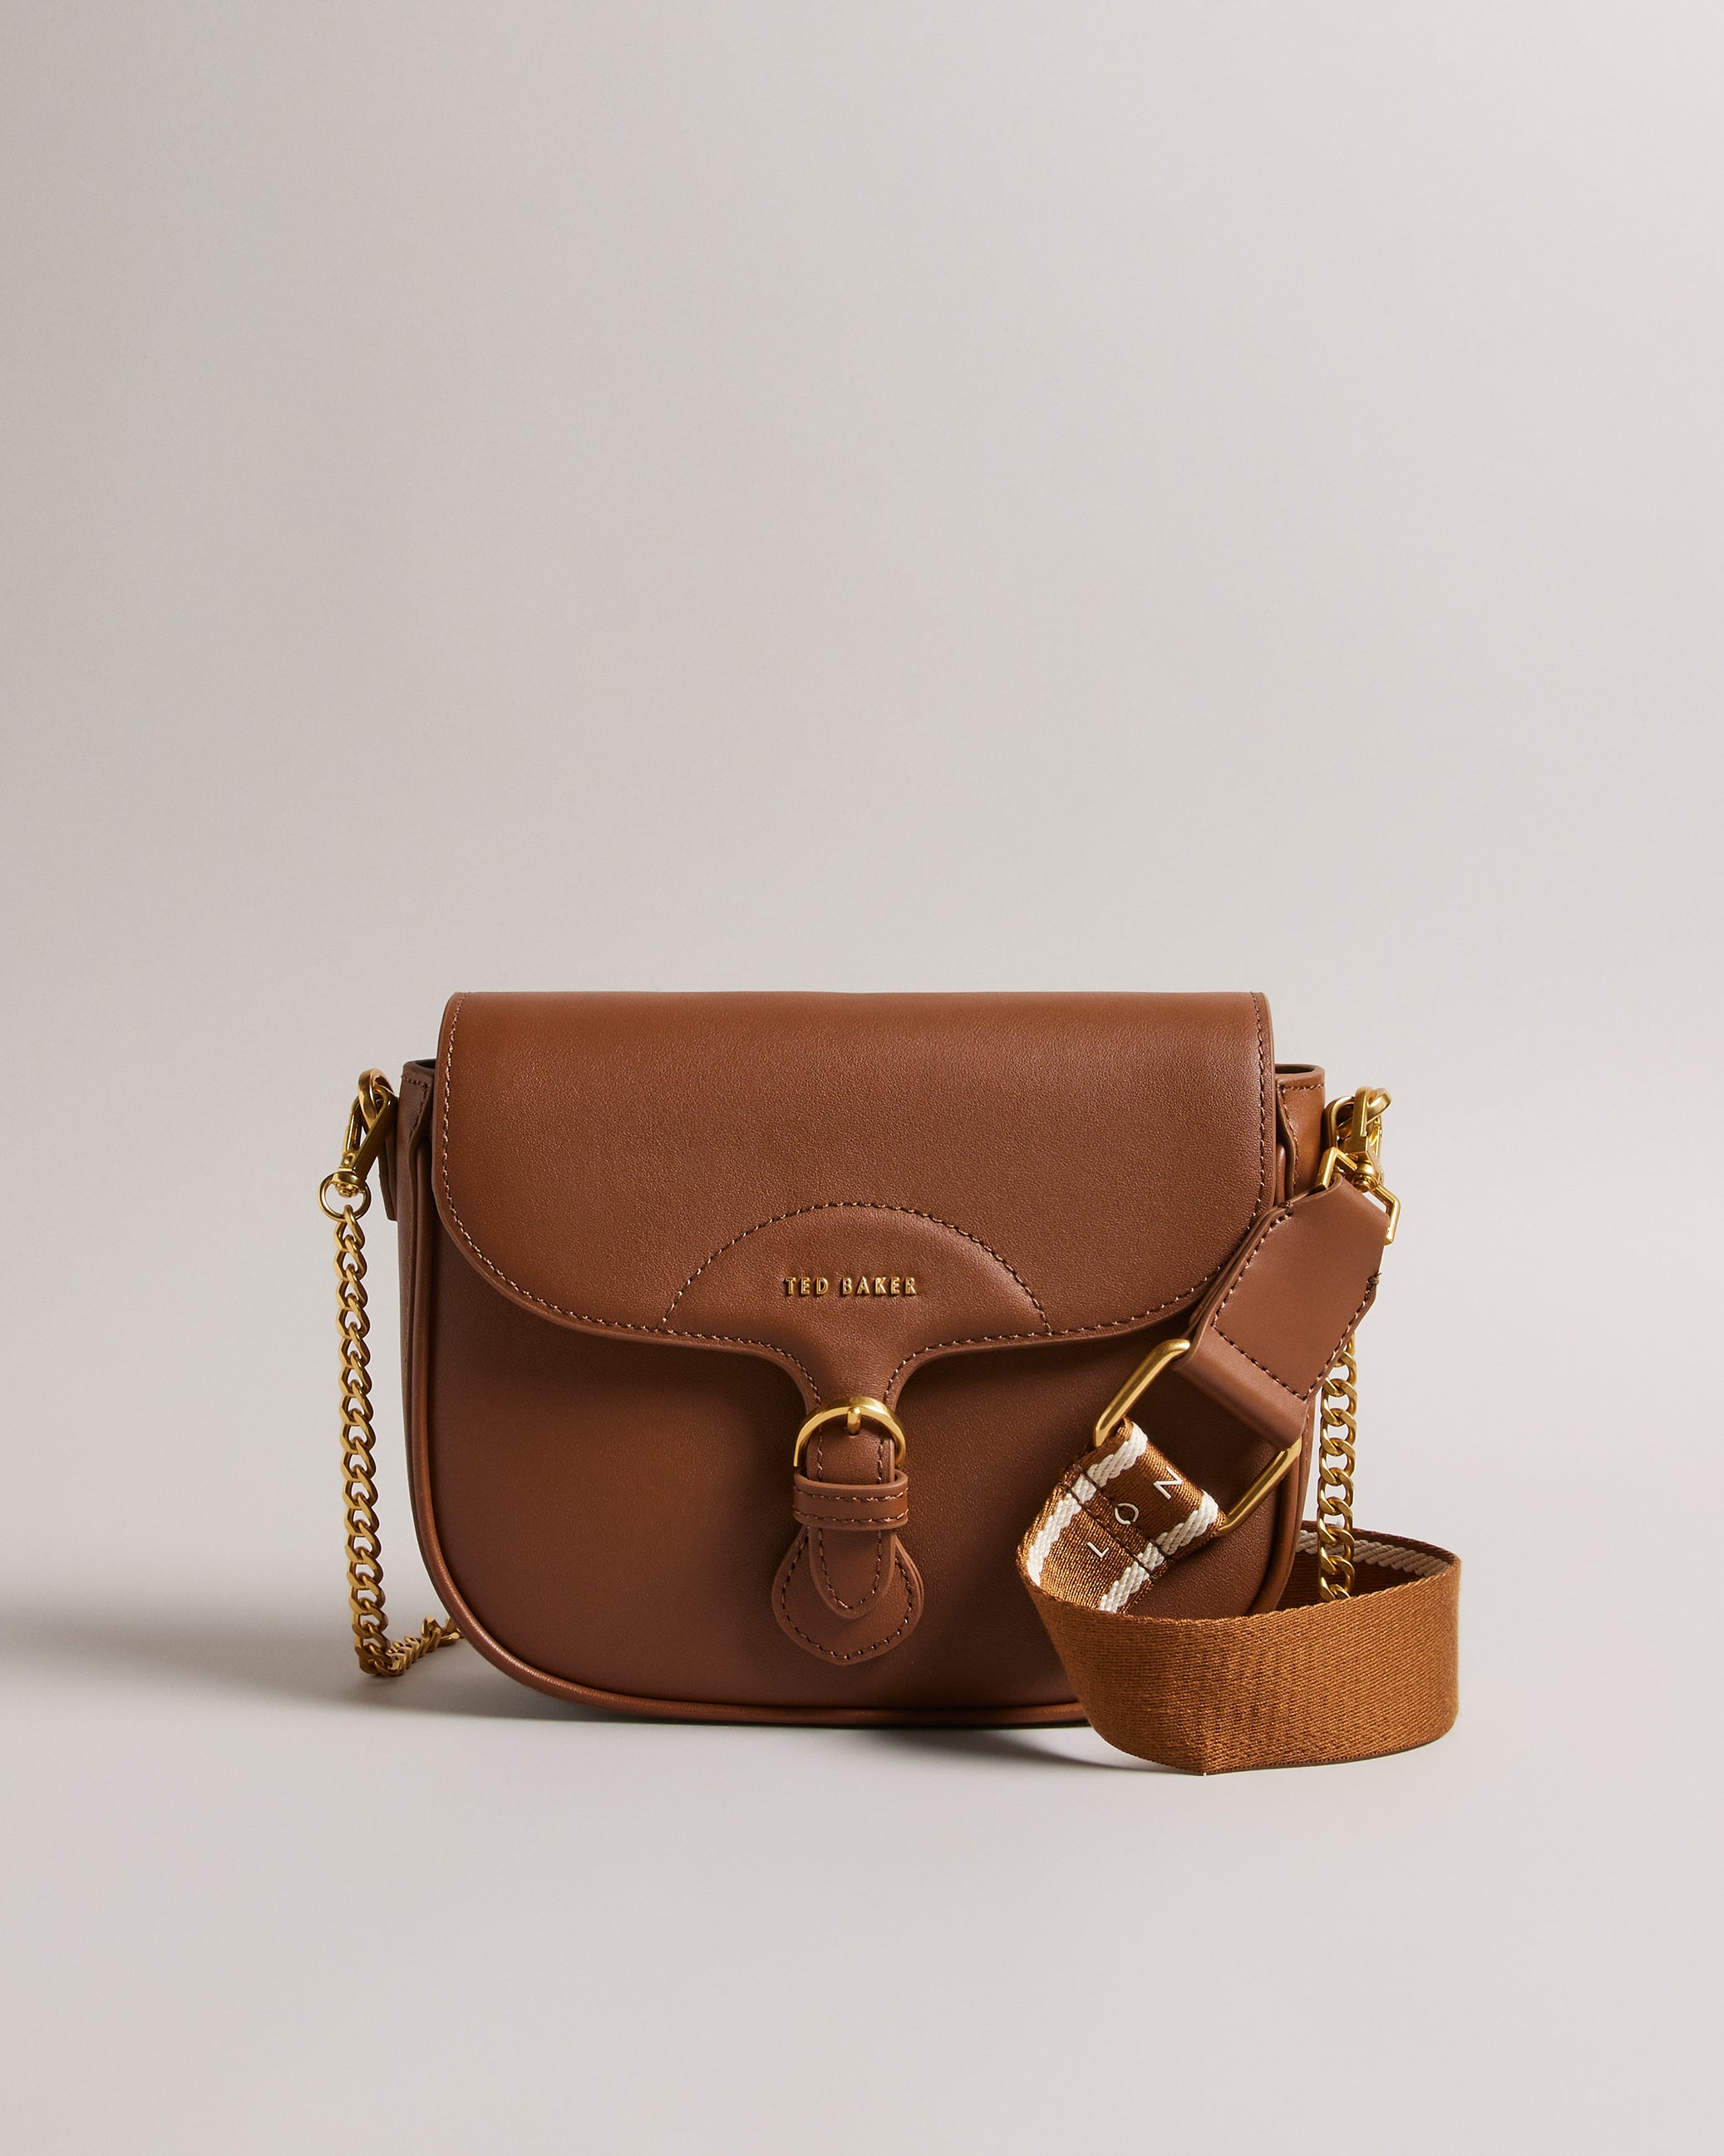 Women's TED BAKER Crossbody Bags Sale, Up To 70% Off